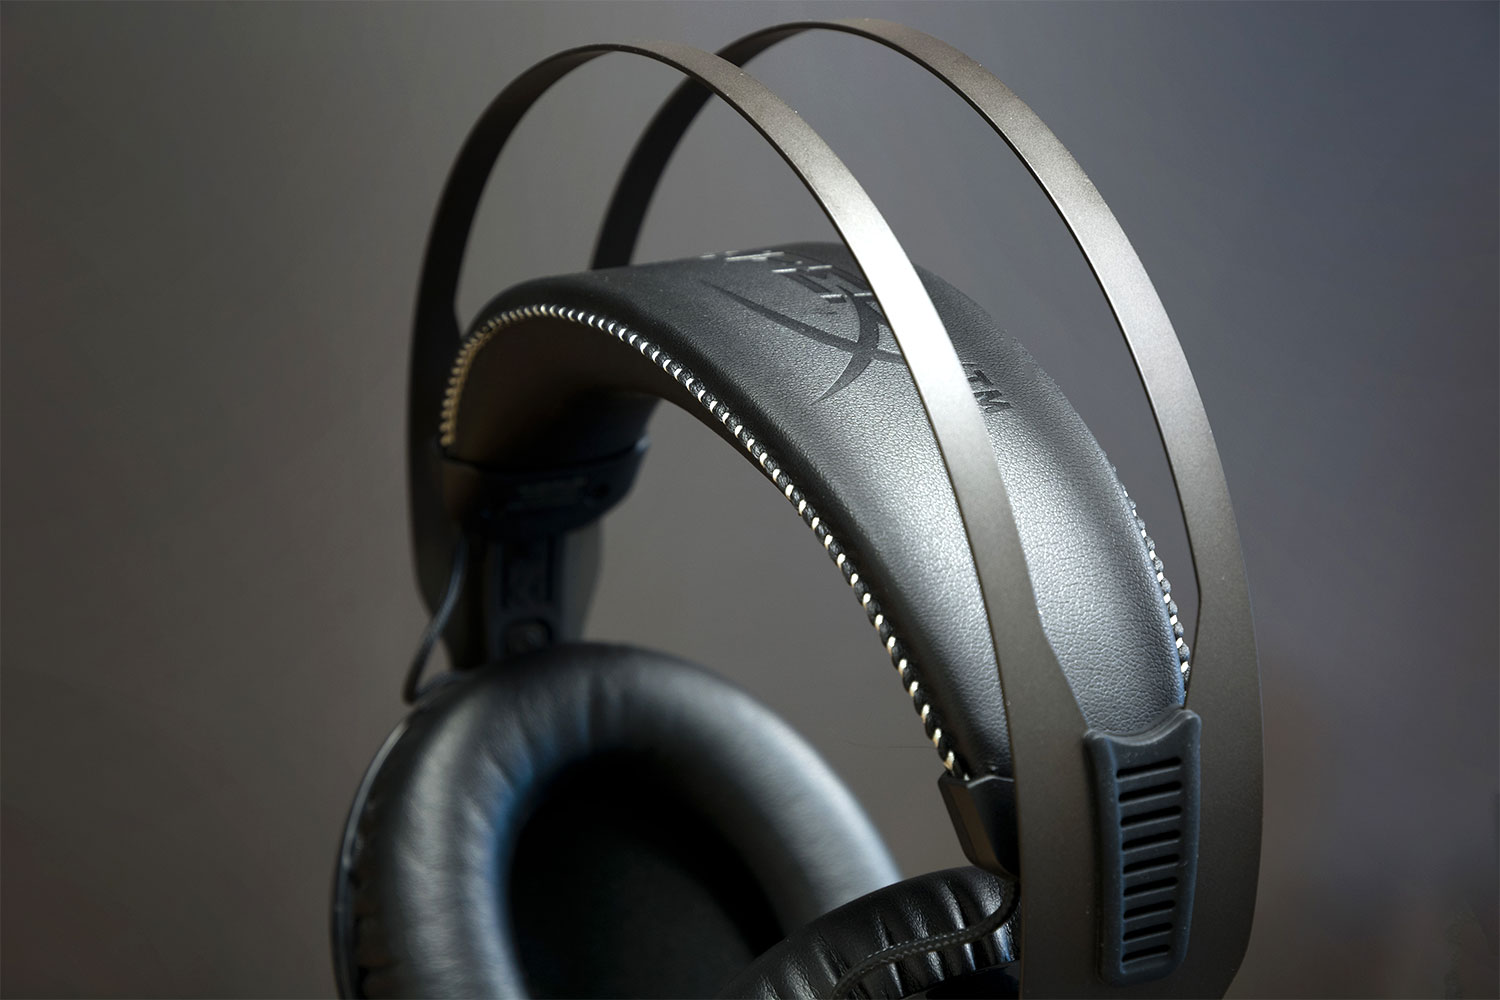 HyperX Cloud Revolver S Gaming Headset Review | Digital Trends